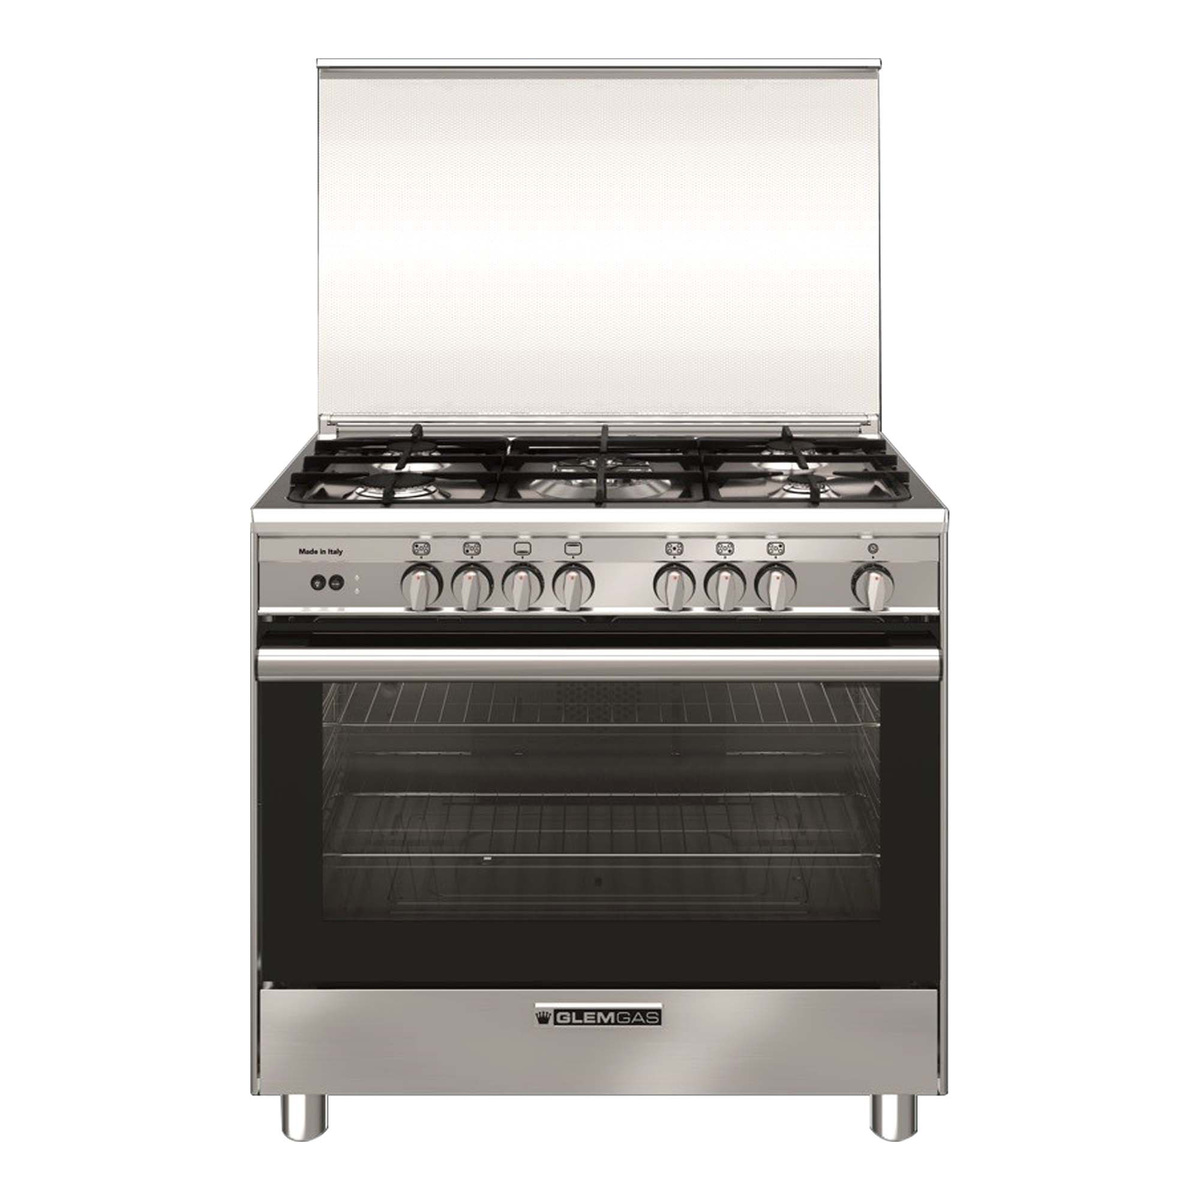 Glemgas Specialista Base Gas Cooking Range With 5 Burners, Stainless Steel, 90X60 cm, SB9612GIFSG